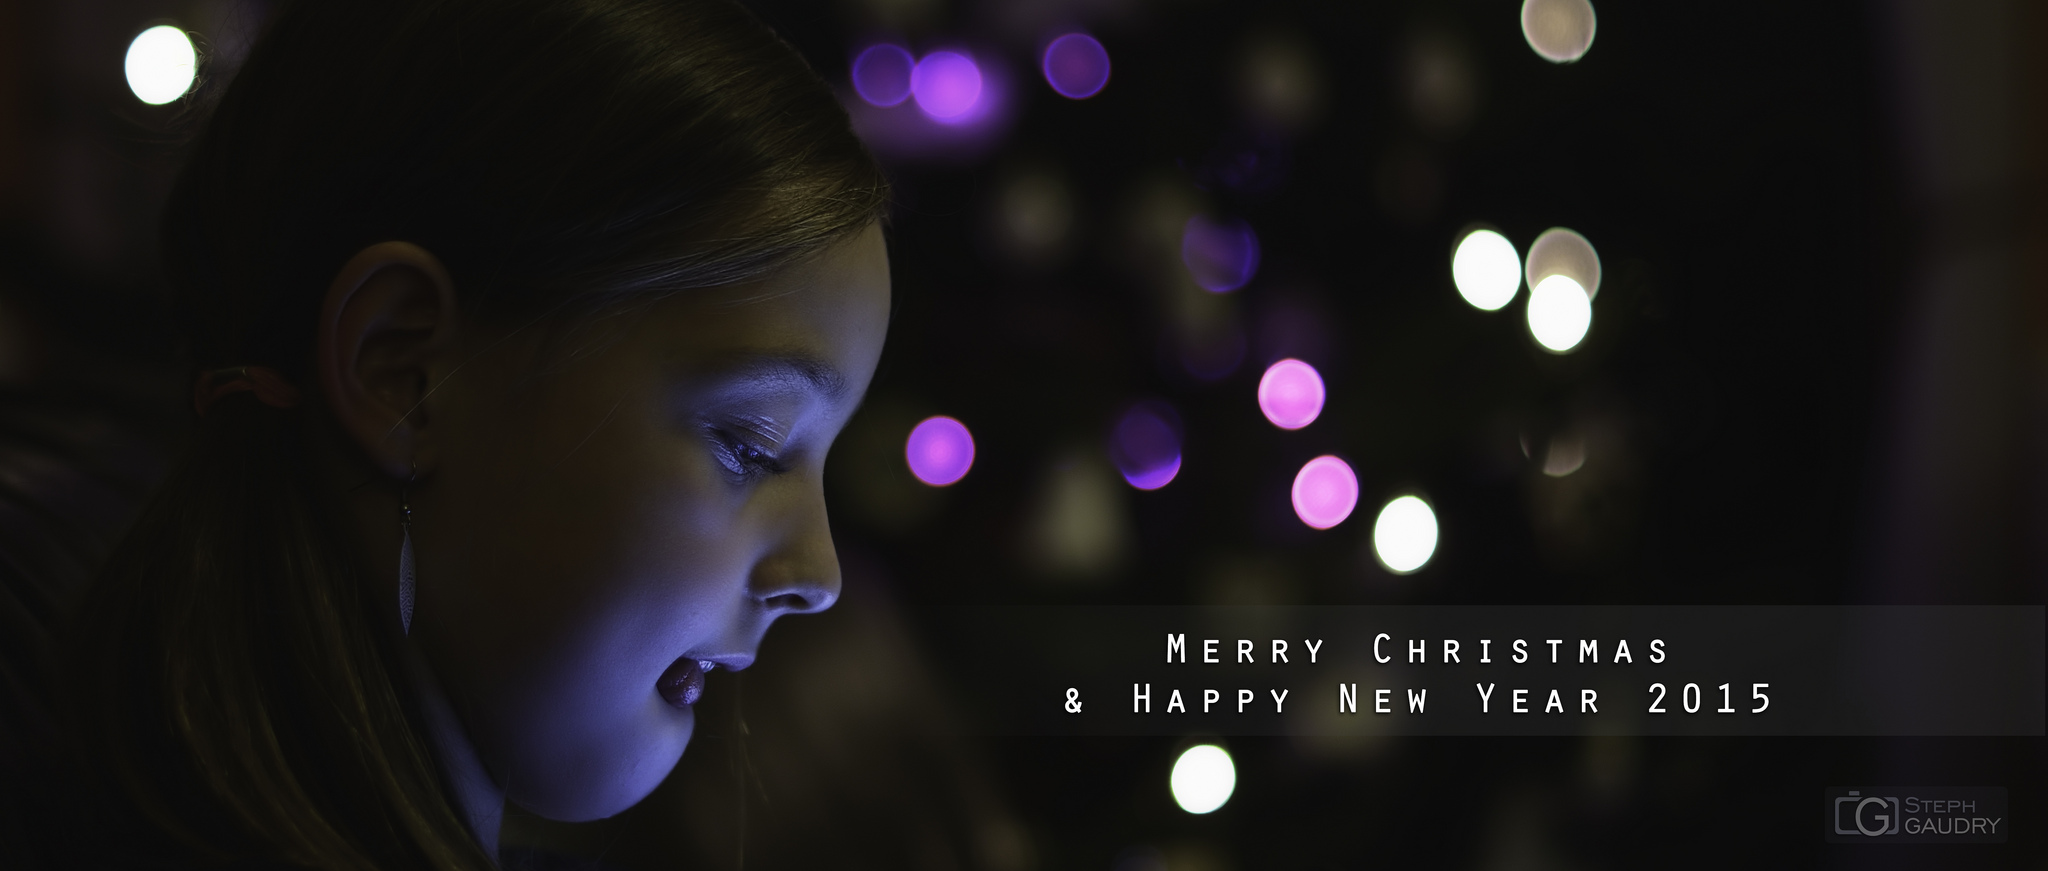 Merry Christmas and Happy New Year 2015 [Click to start slideshow]